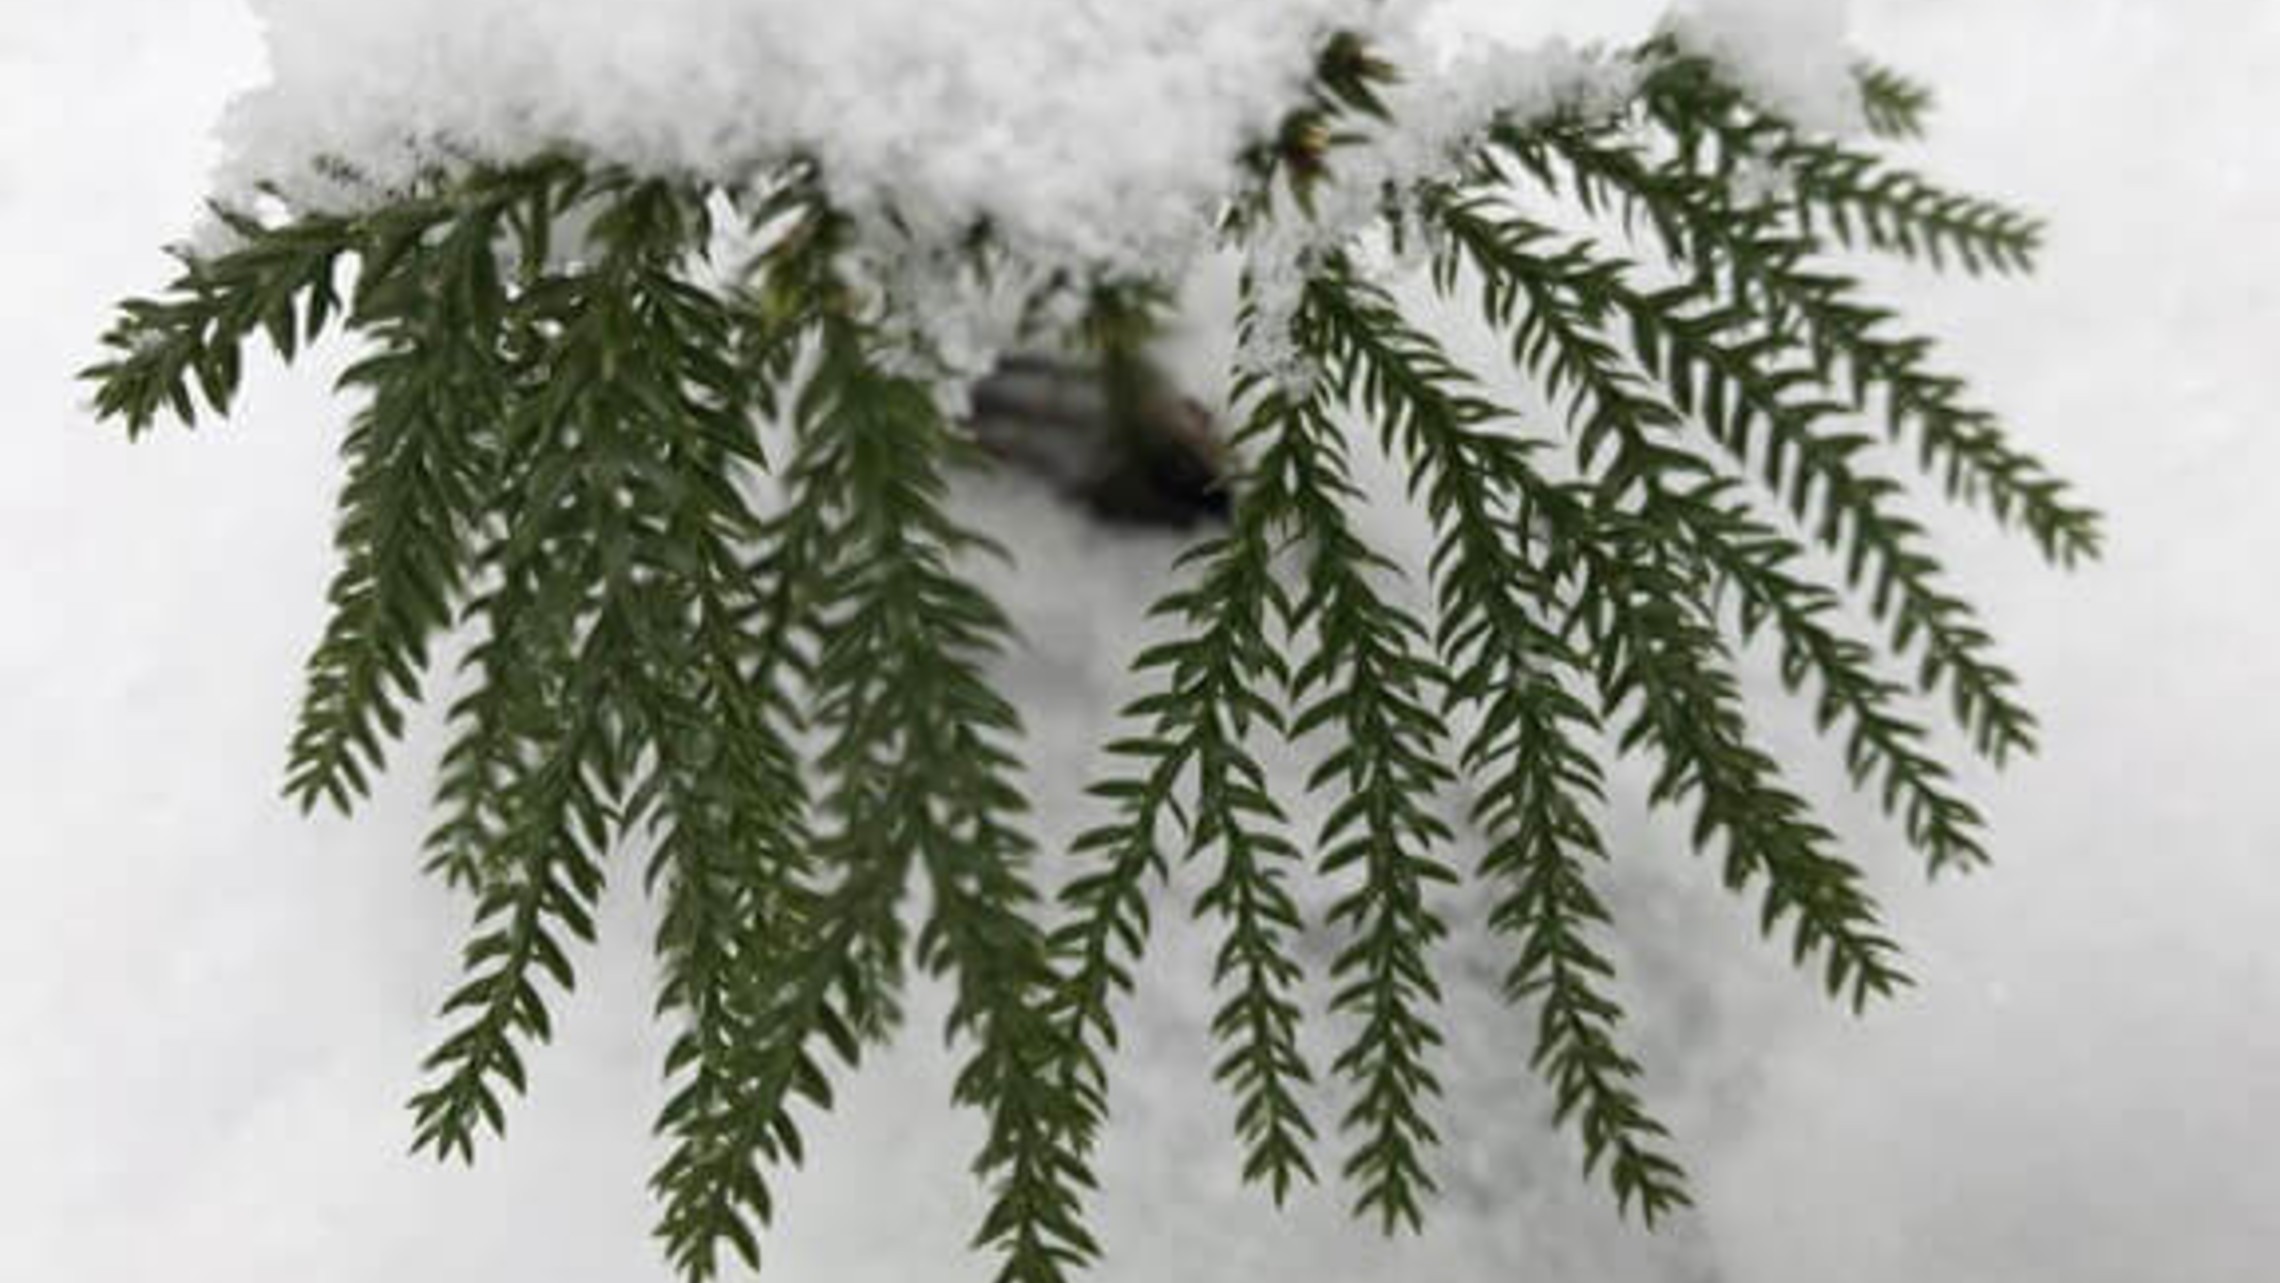 Evergreen branch covered in deep snow